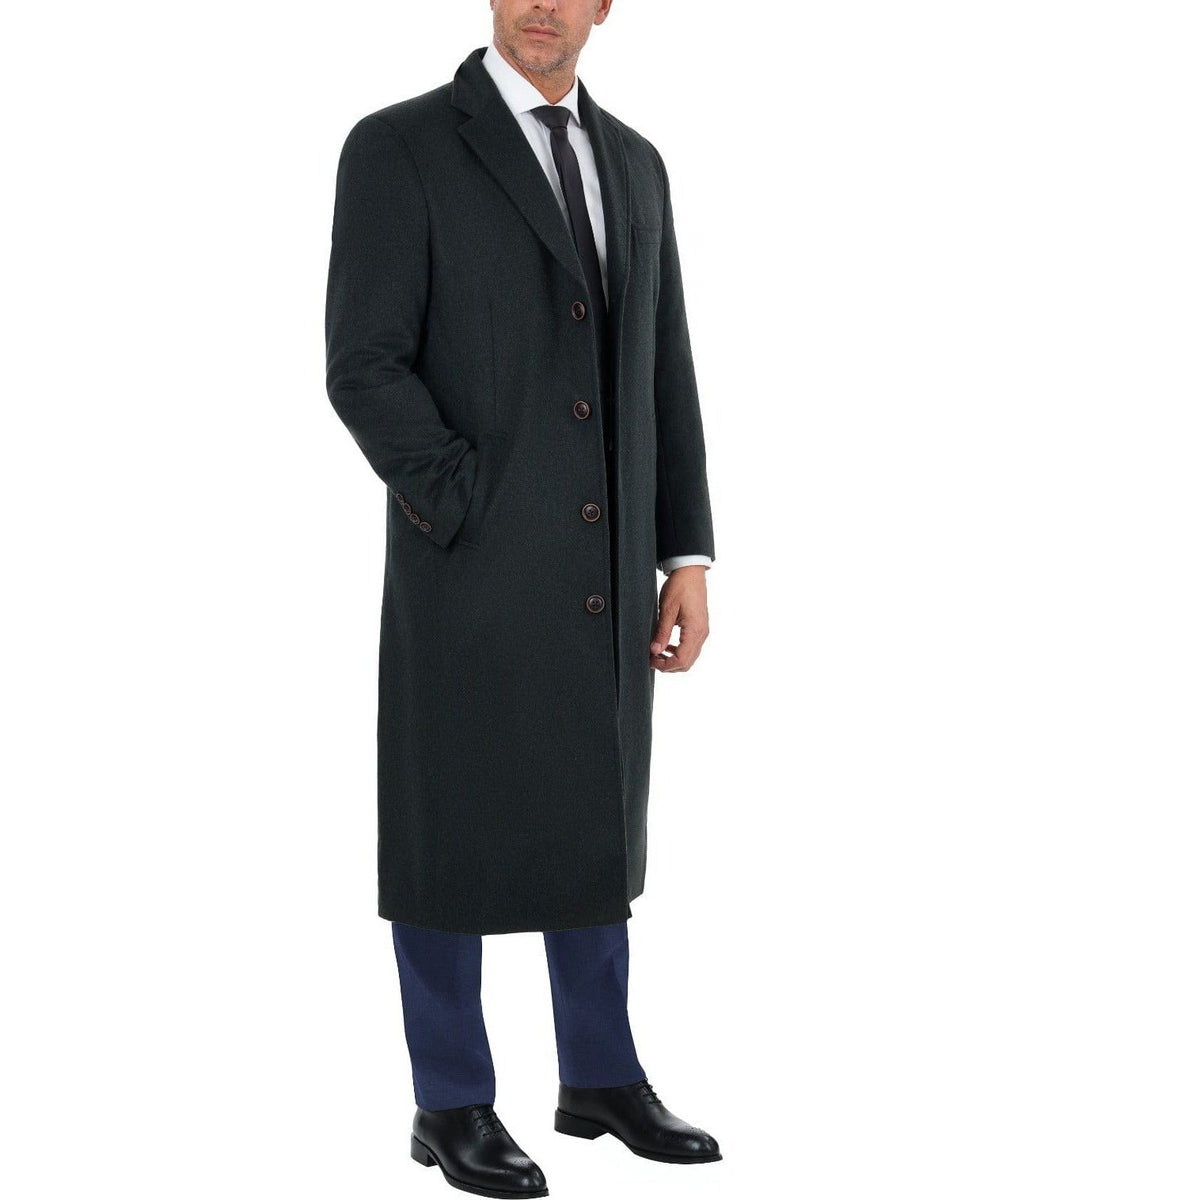 Label E OUTERWEAR Mens Regular Fit Solid Hunter Green Full Length Wool Cashmere Overcoat Top Coat